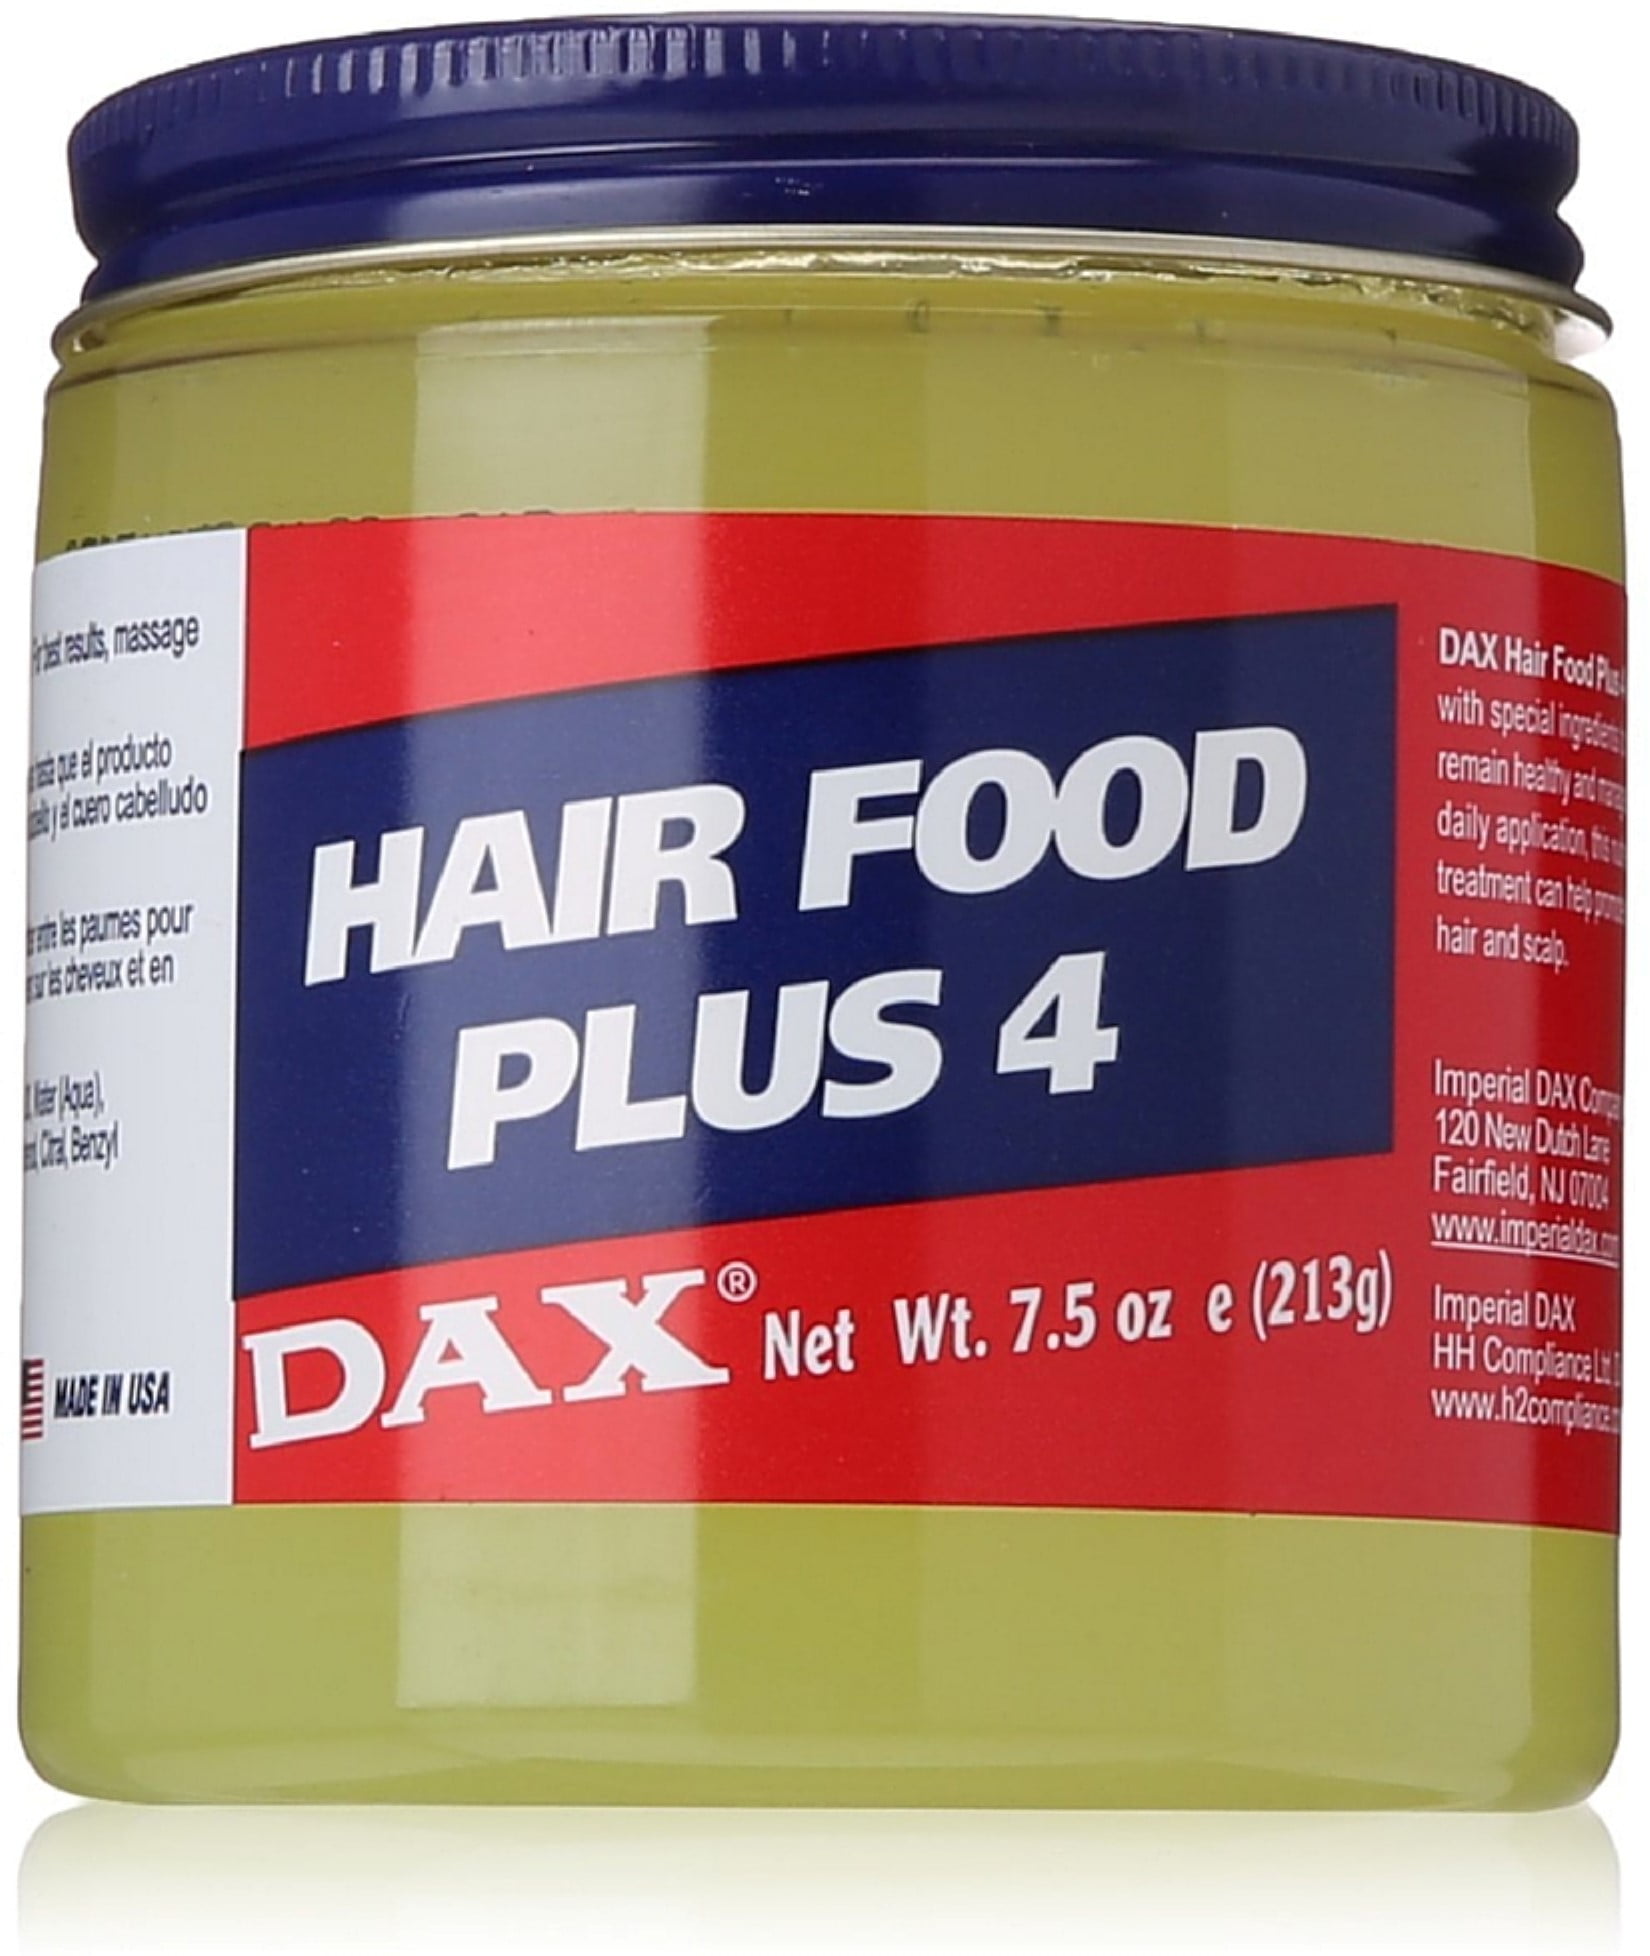 Dax Hair Care on X: Keep your scalp moisturized, dandruff free, and your  hair free from split ends! Soothe itching and flaking plus get the thick,  luscious hair you crave, with our